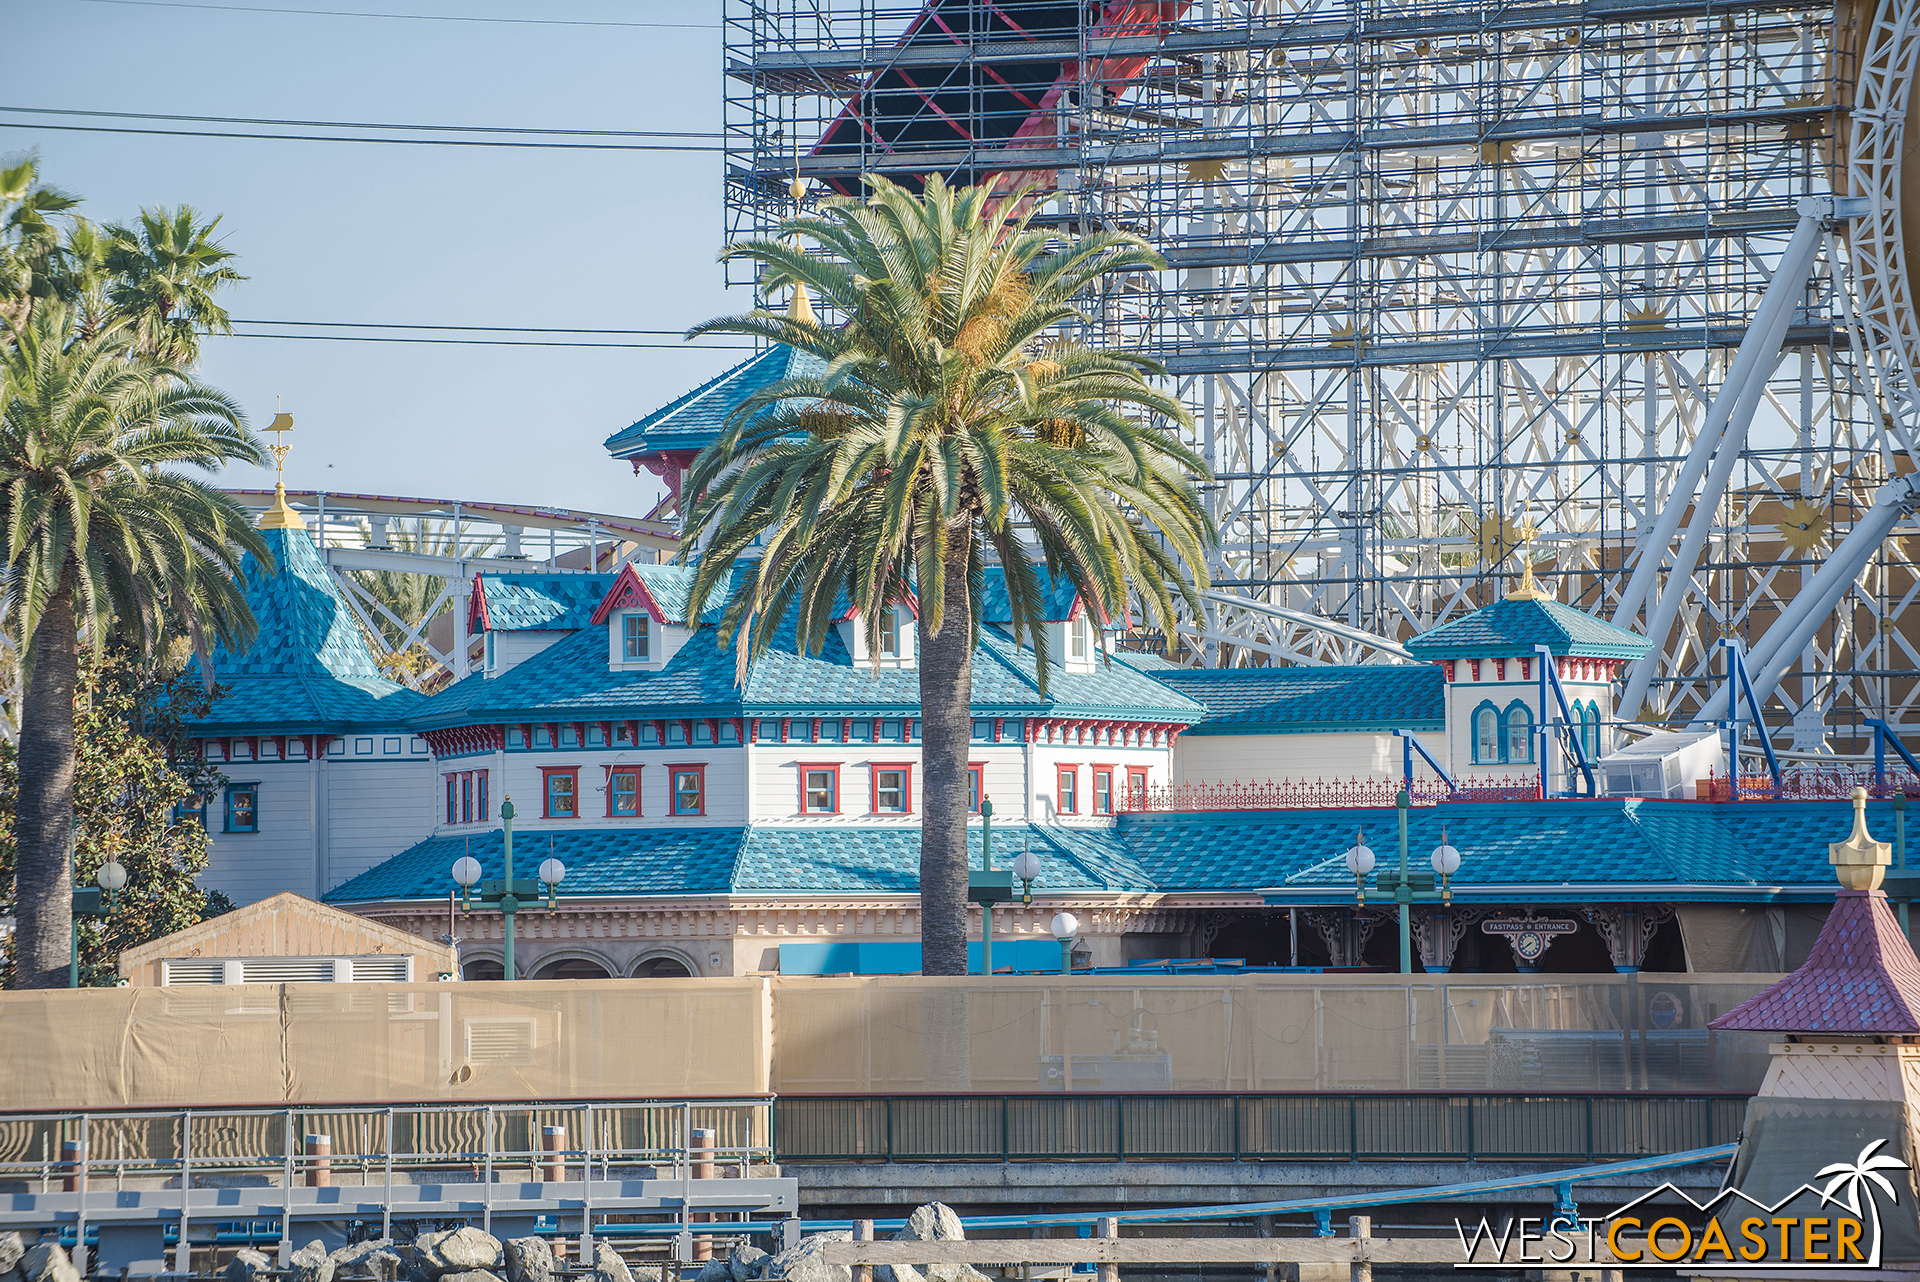  The roller coaster was actually testing earlier last week too! 